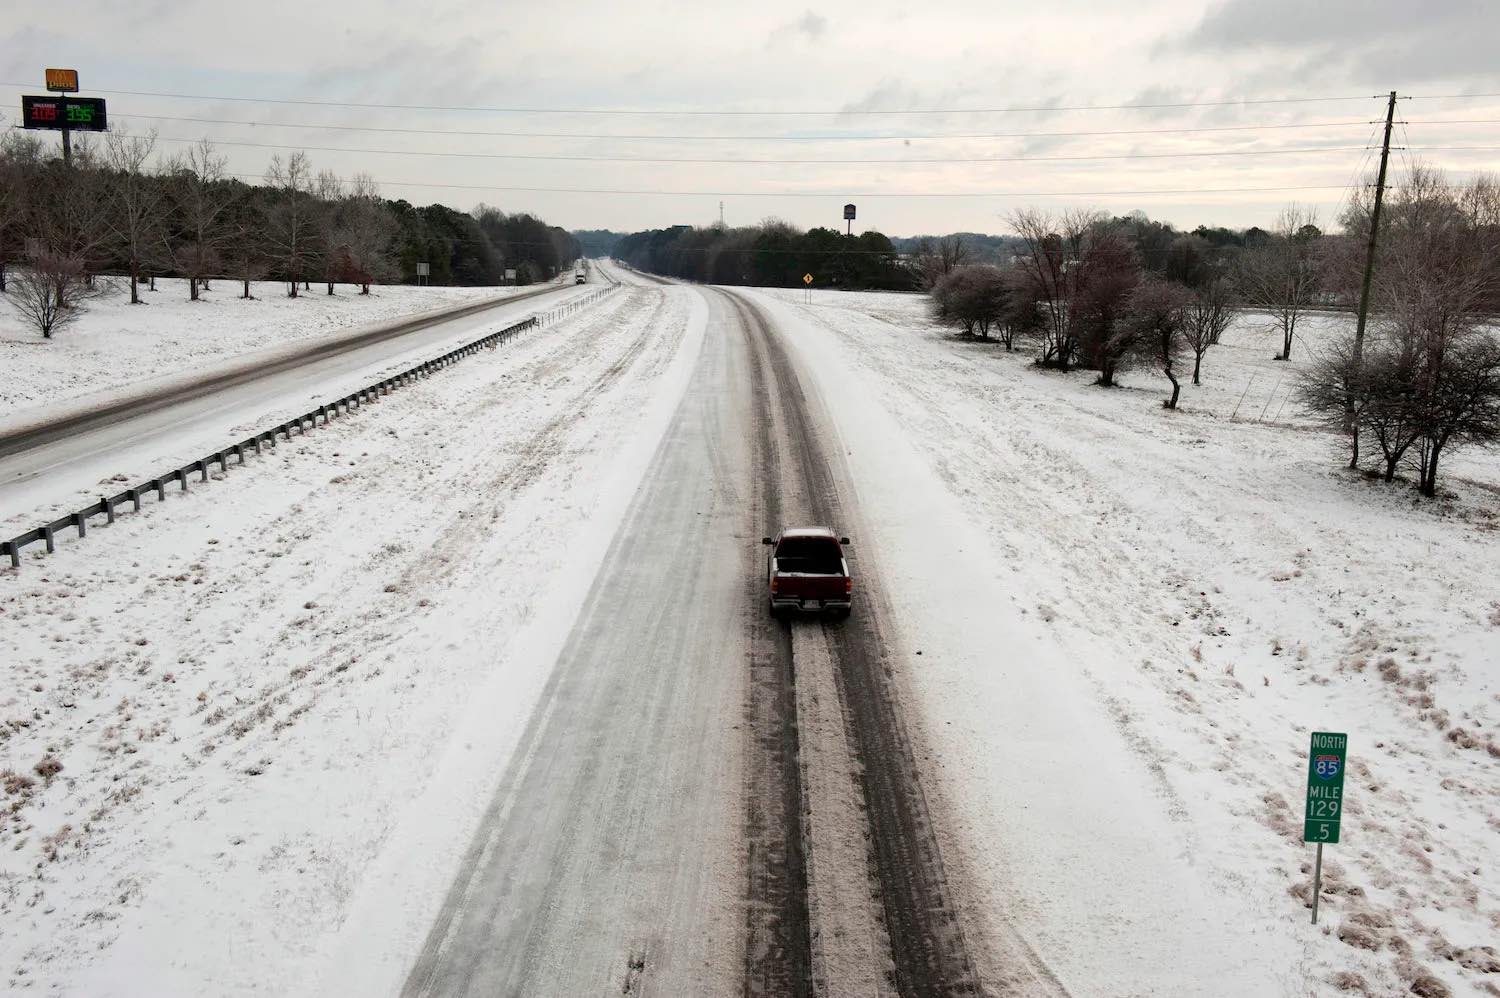 Diesel pickup truck drives down a cold snowy highway during the winter